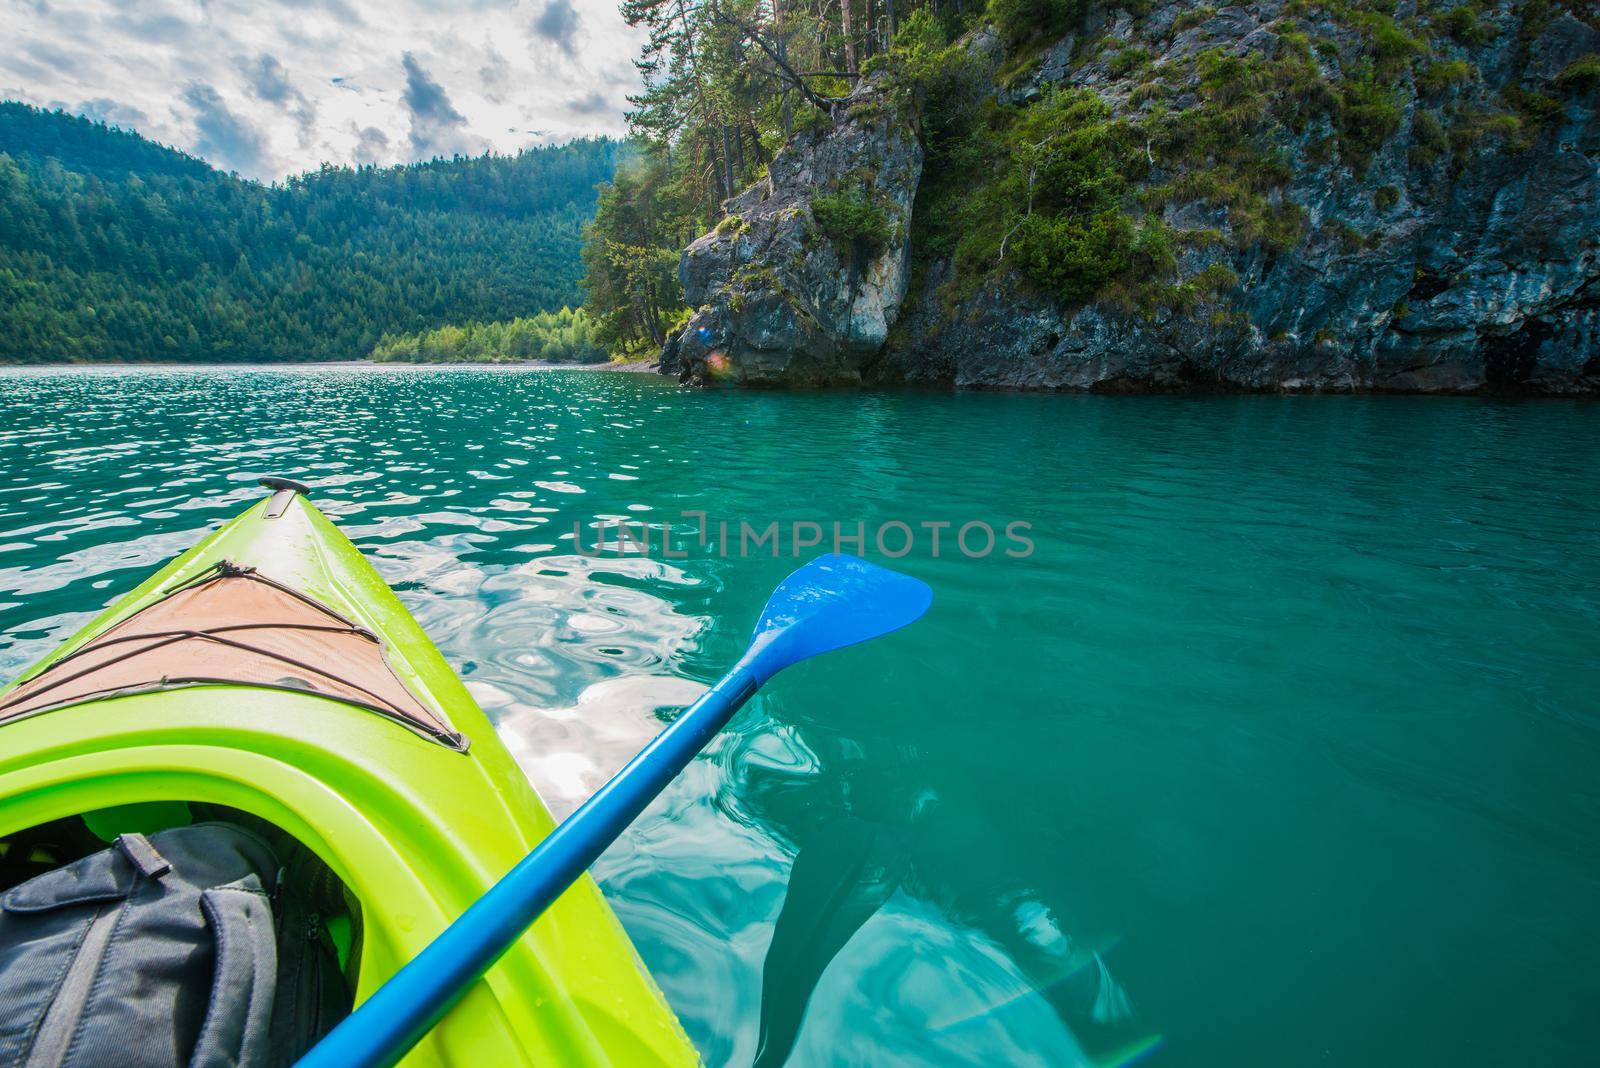 Turquoise Mountain Lake Kayaking Water Sports and Recreation. Summer Time Activity.